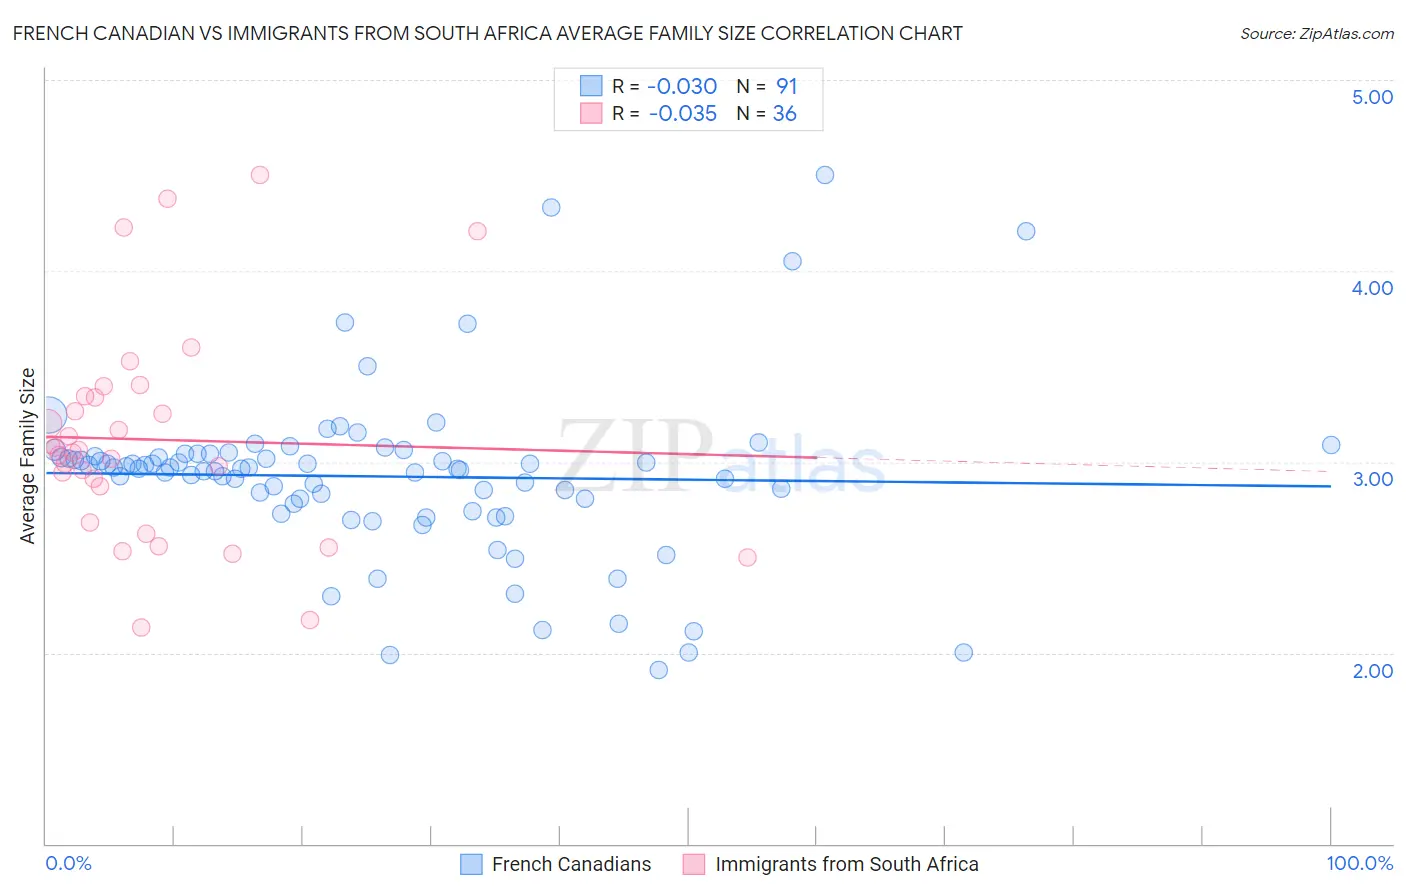 French Canadian vs Immigrants from South Africa Average Family Size